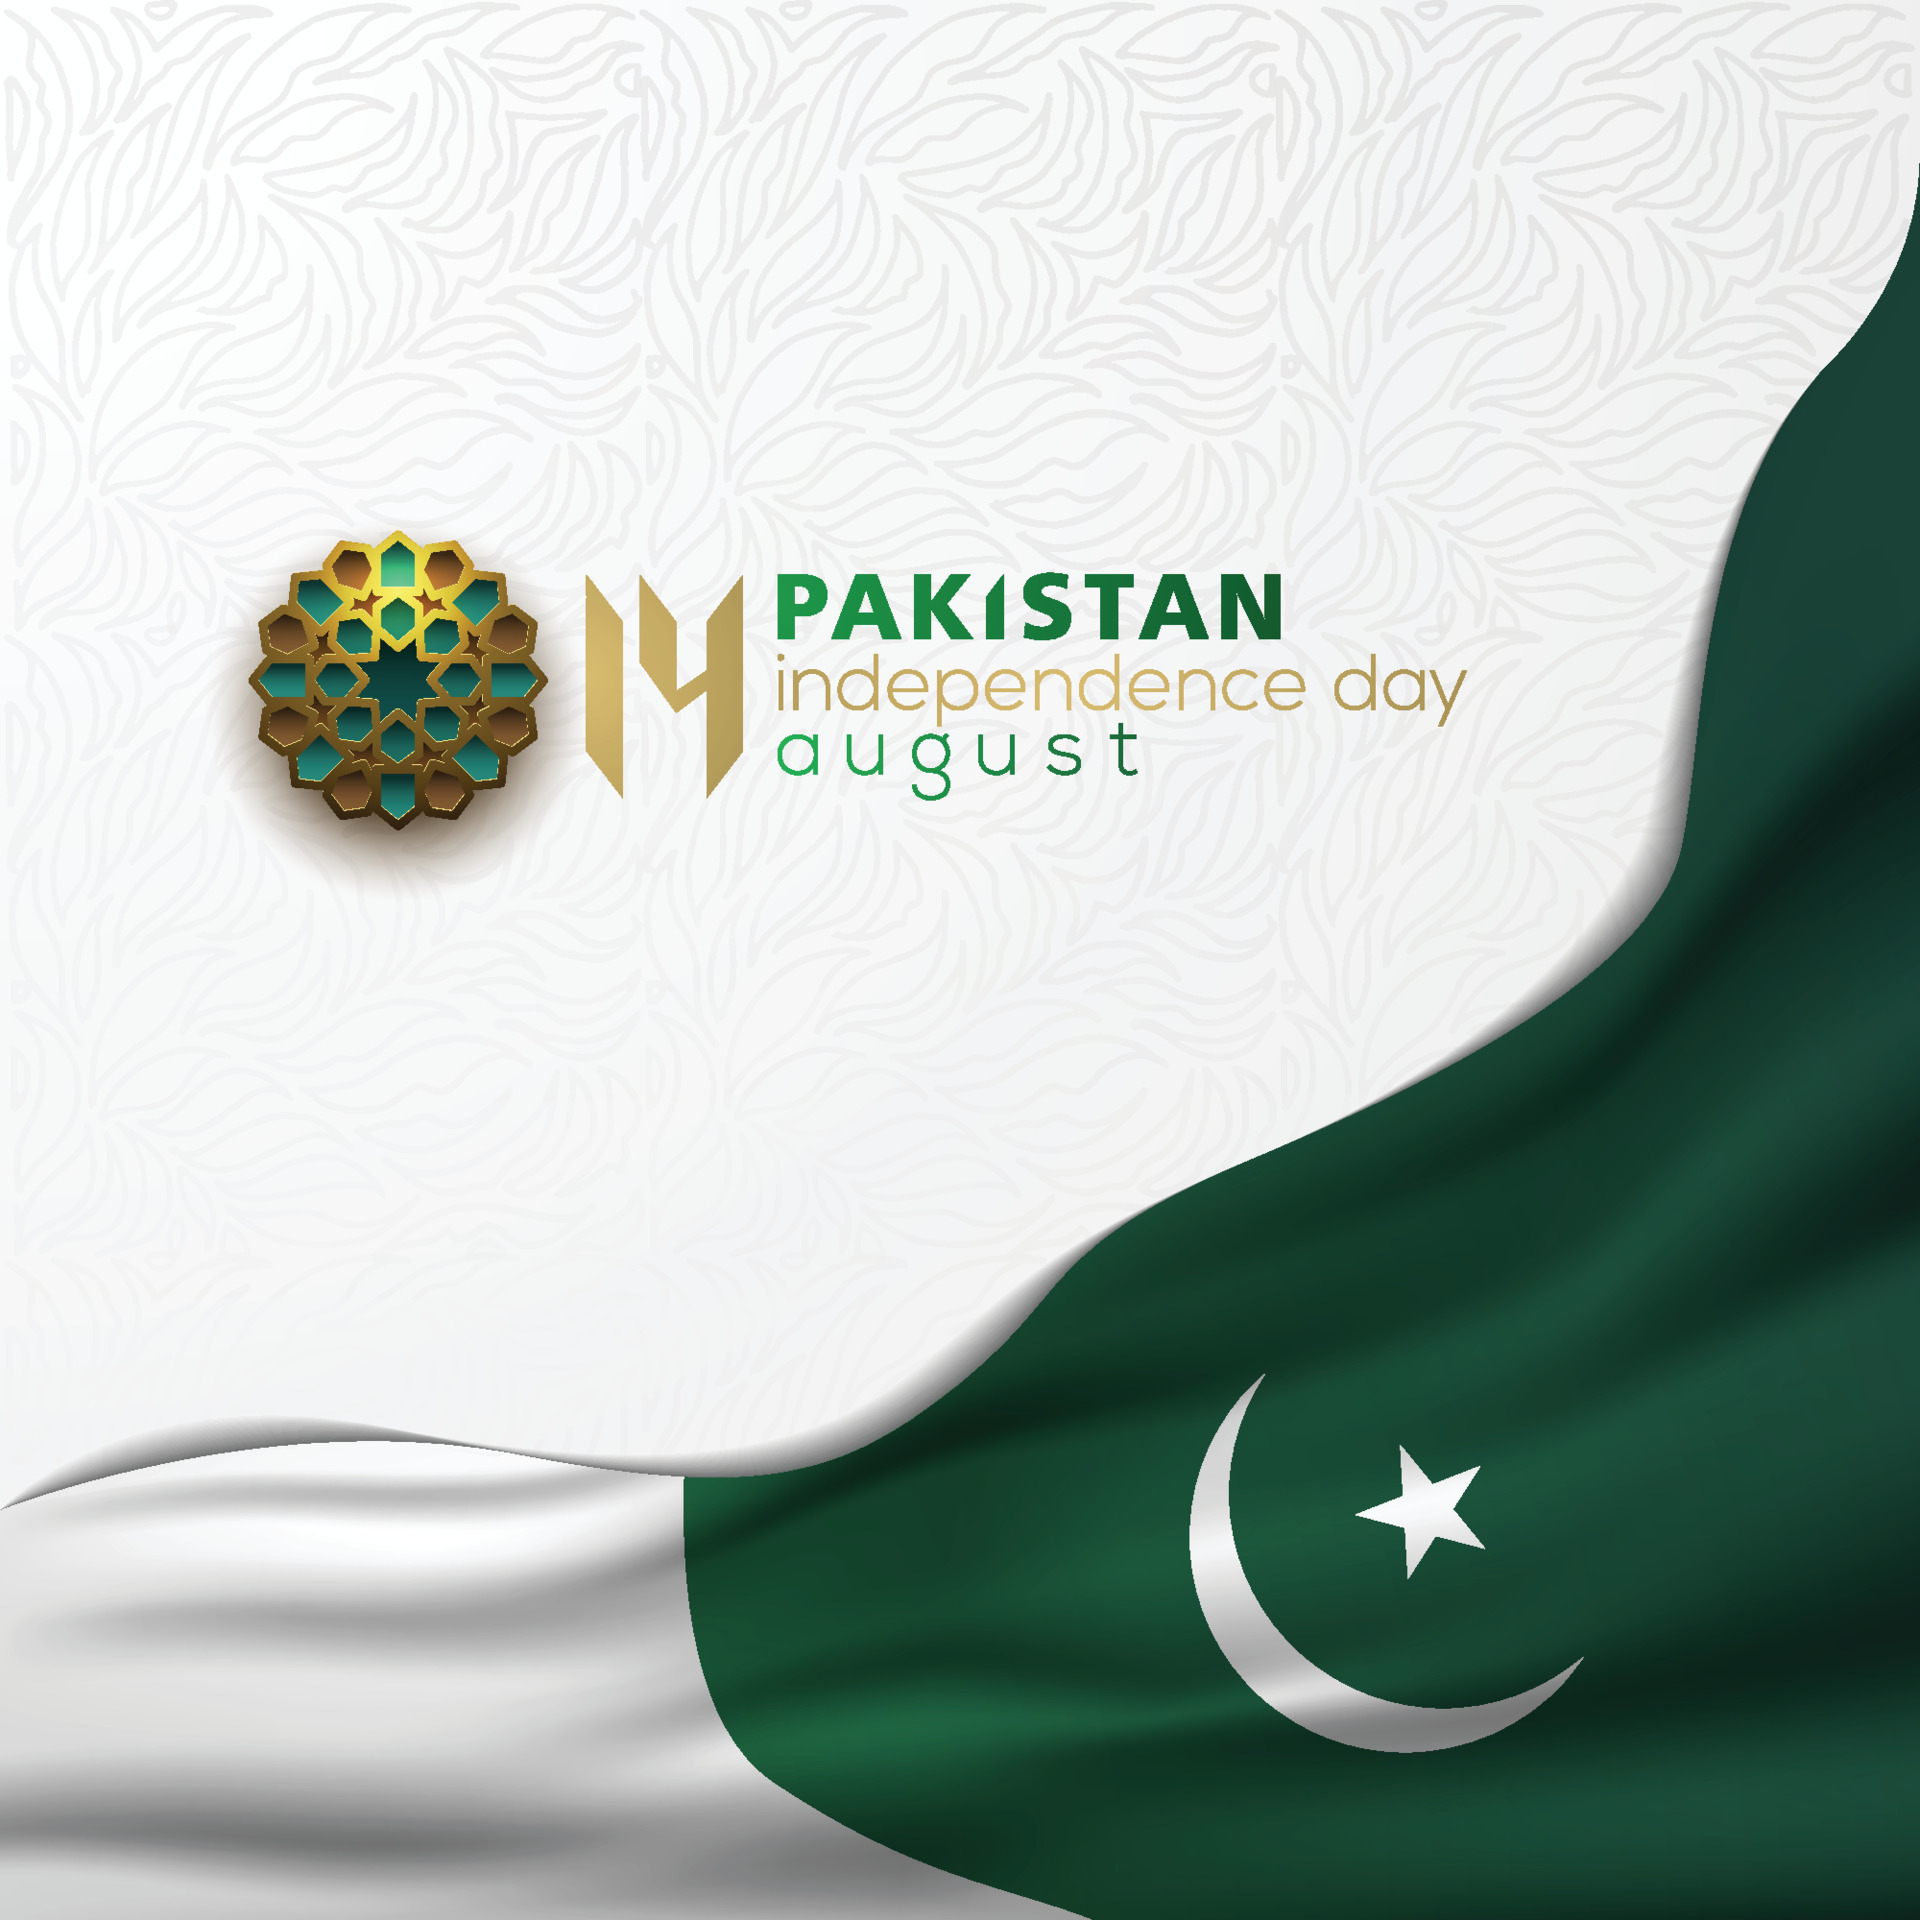 greeting-pakistan-independence-day-14-august-background-vector-design